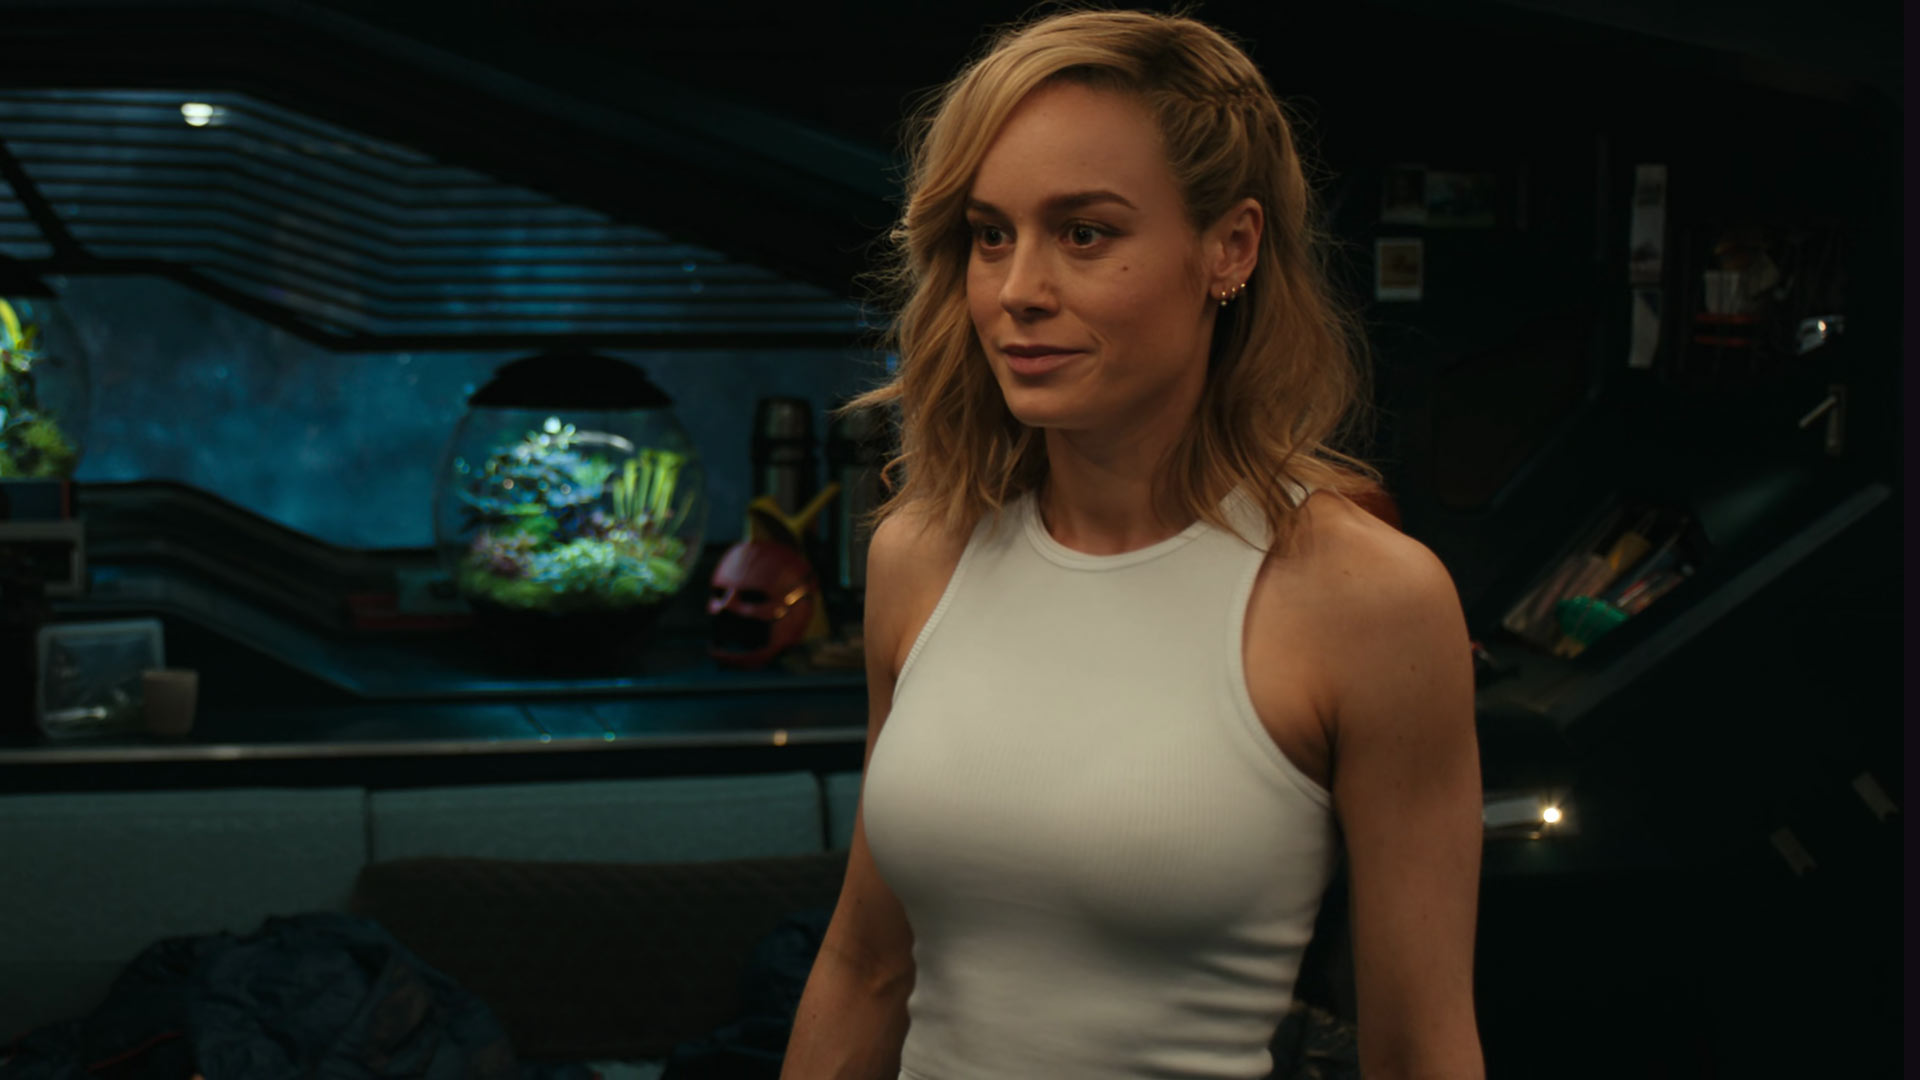 Brie Larson in a tight white tanktop in The Marvels